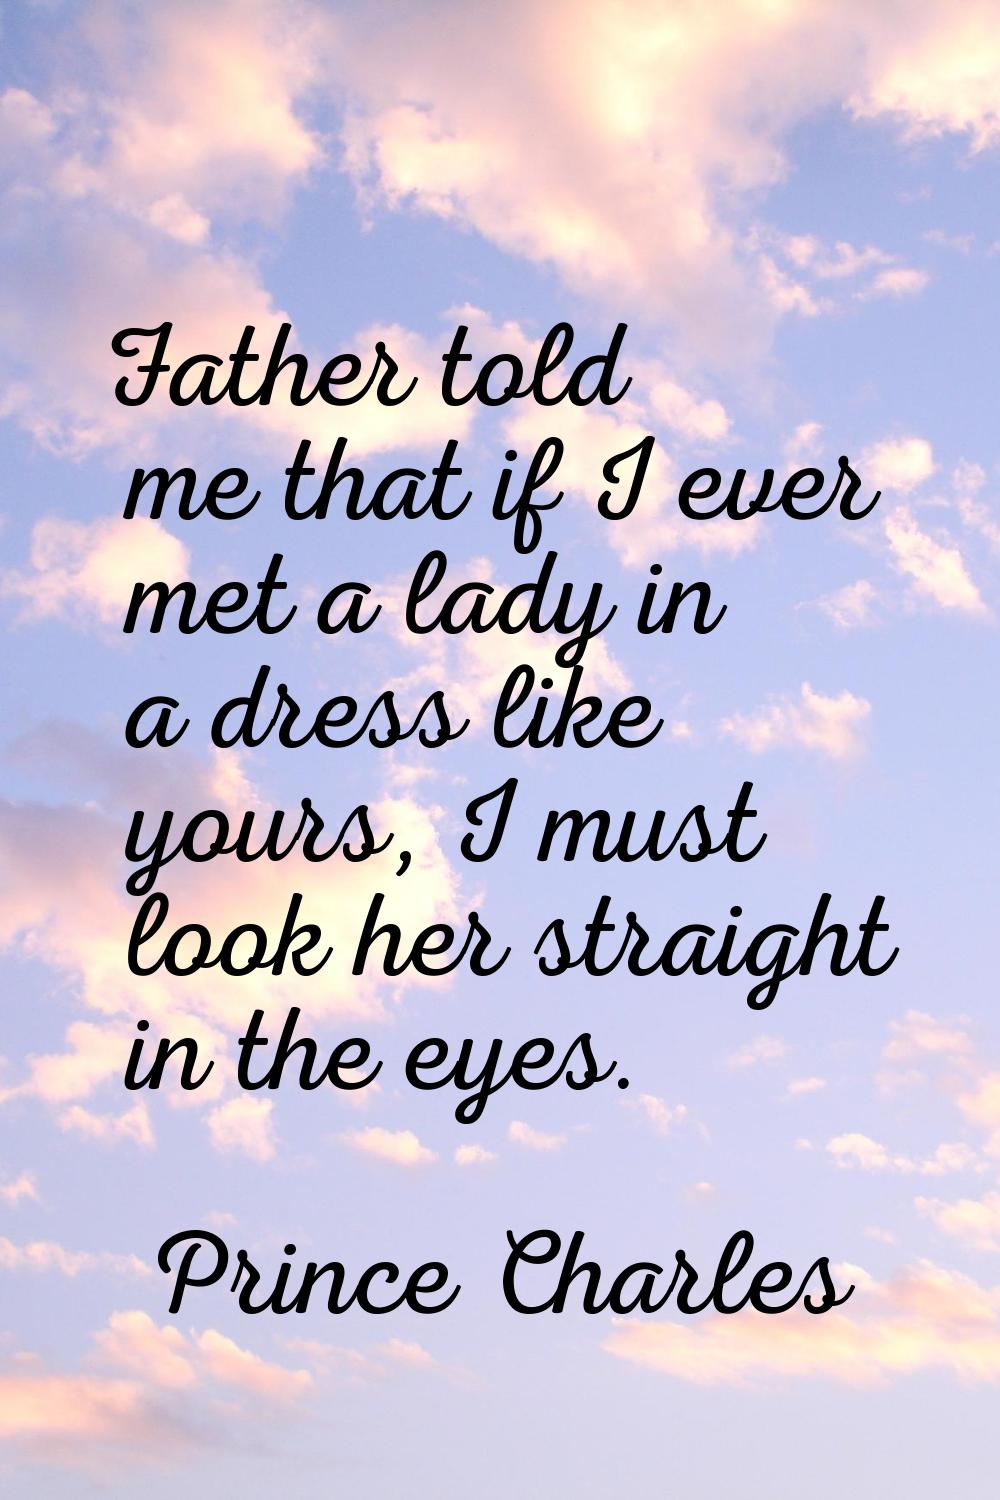 Father told me that if I ever met a lady in a dress like yours, I must look her straight in the eye